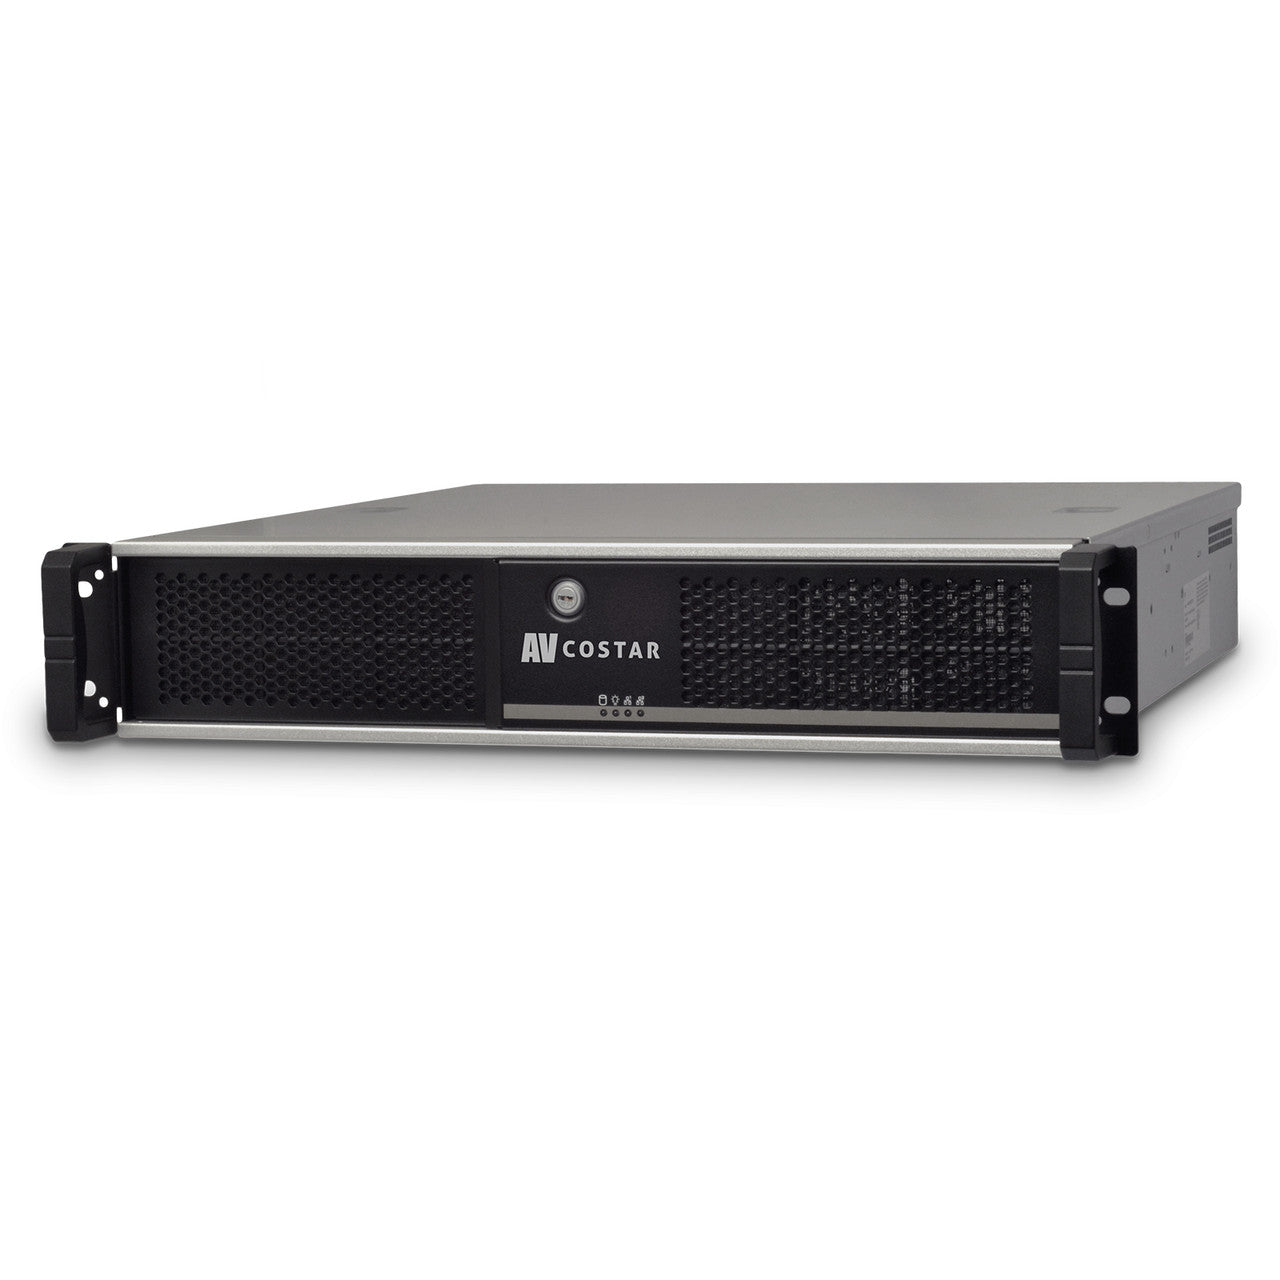 Arecont Vision AV-CSCX12T 2U Compact Server, Linux, 12TB, Removable HDD Bay